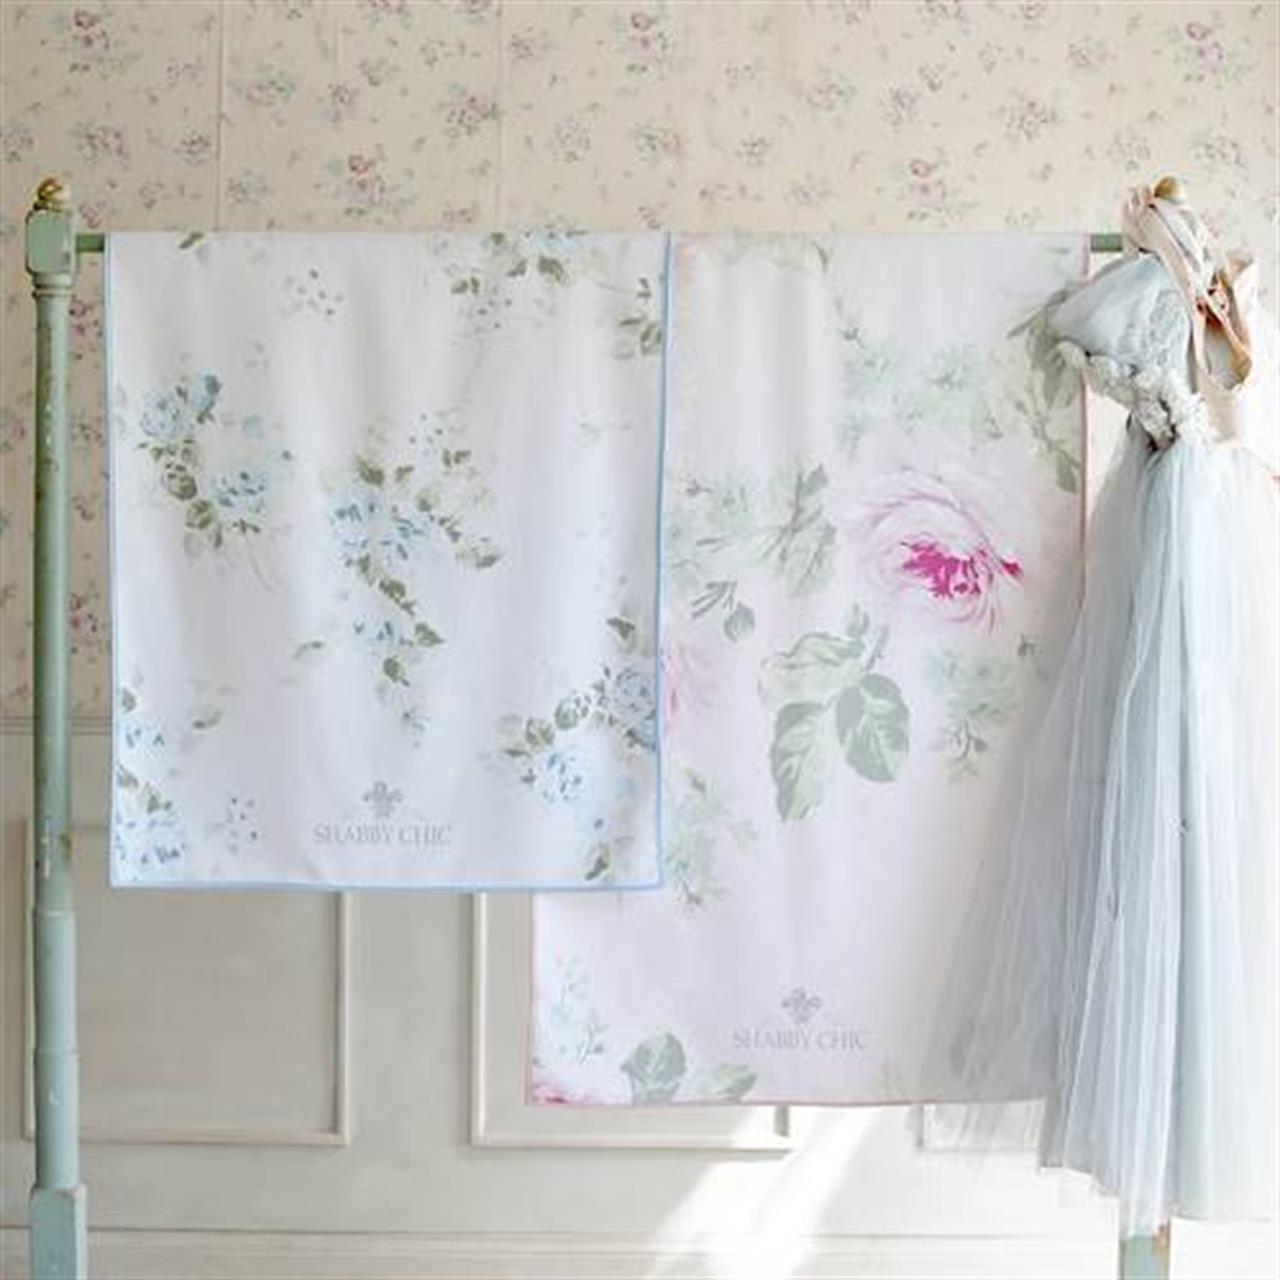 Shabby Chic Towel Higher Res